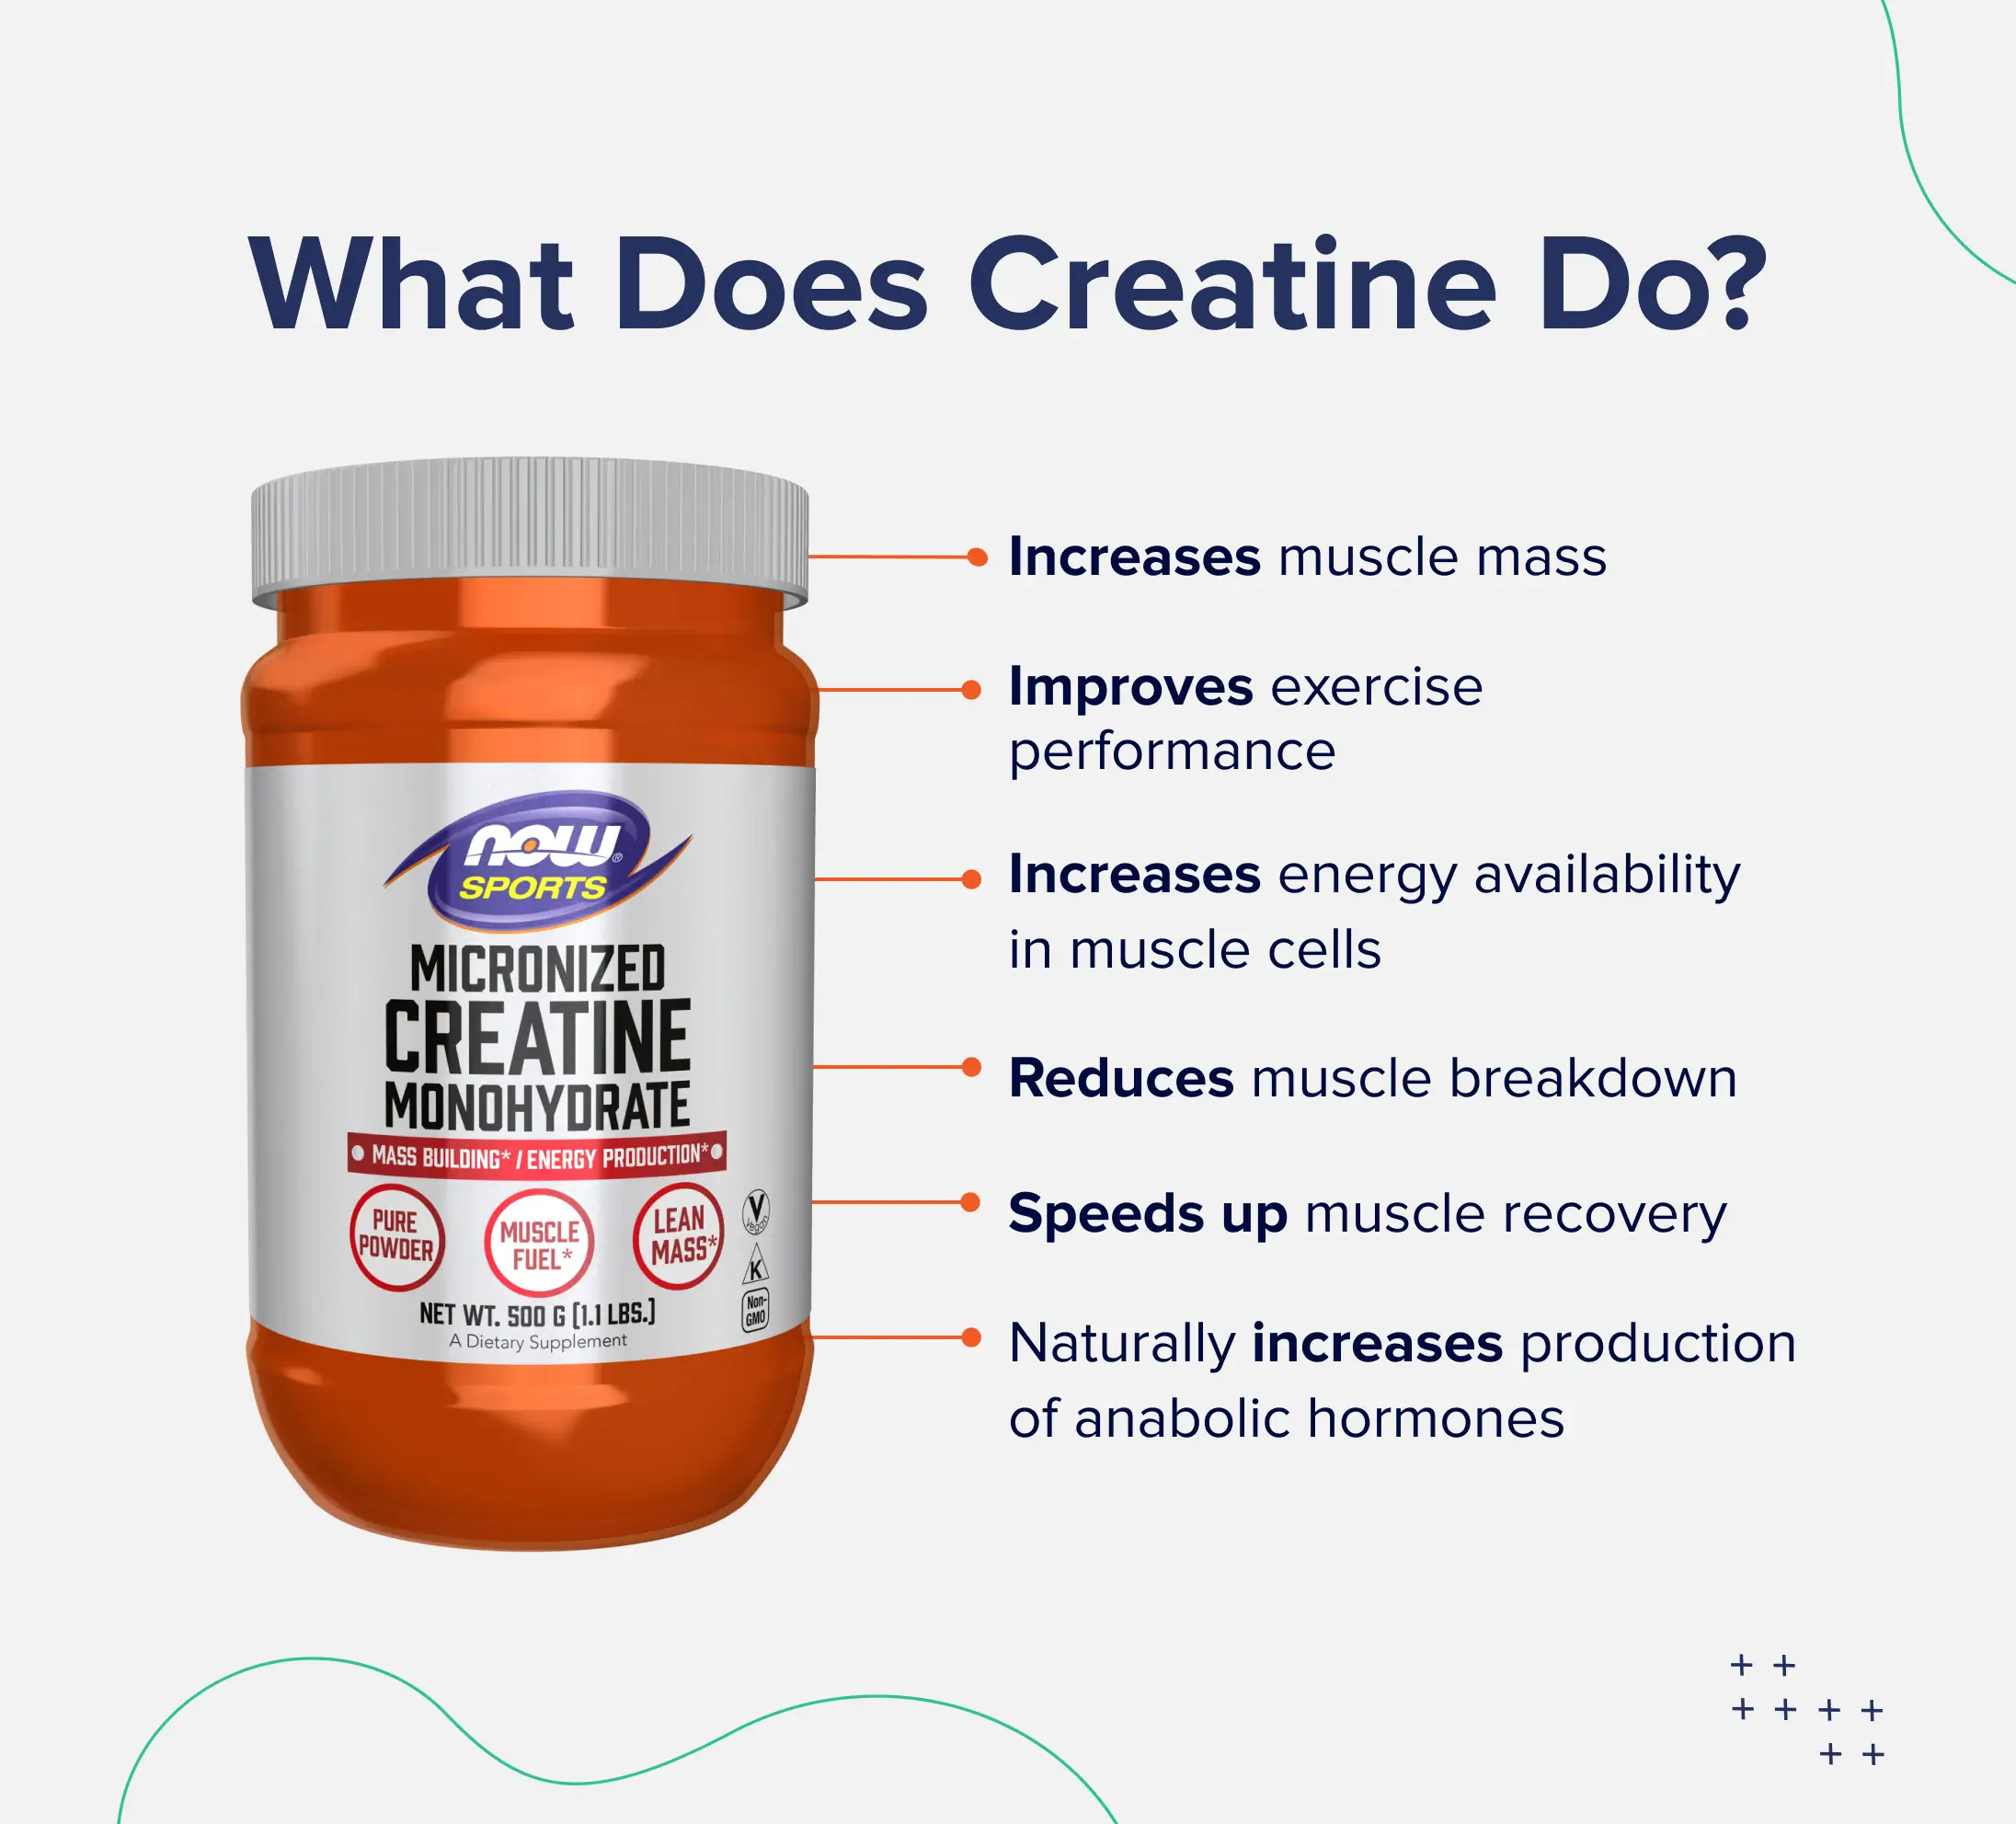 What does creatine do?- increases muscle mass- improves exercise performance- increases energy availability in muscle cells- reduces muscle breakdown- speeds up muscle recovery- naturally increases production of anabolic hormones